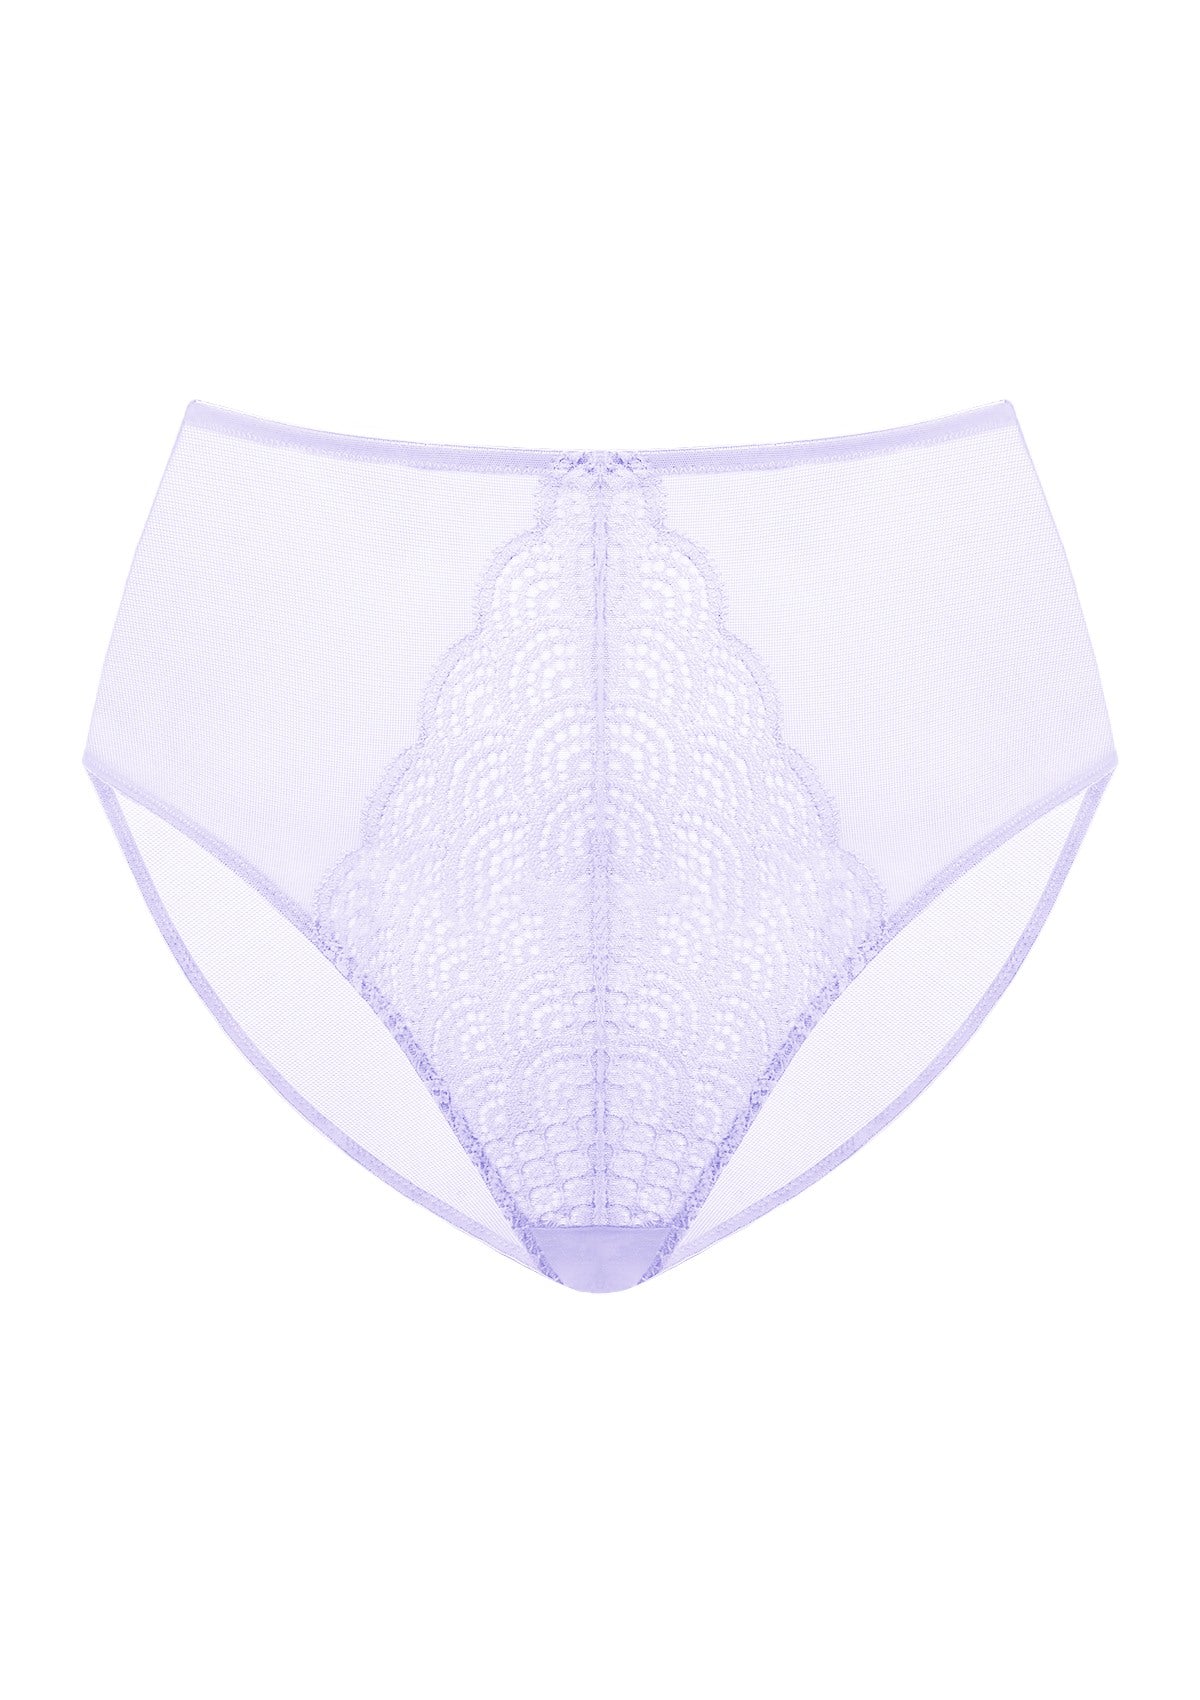 HSIA Spring Romance High-Rise Floral Lacy Panty-Comfort In Style - XL / Light Purple